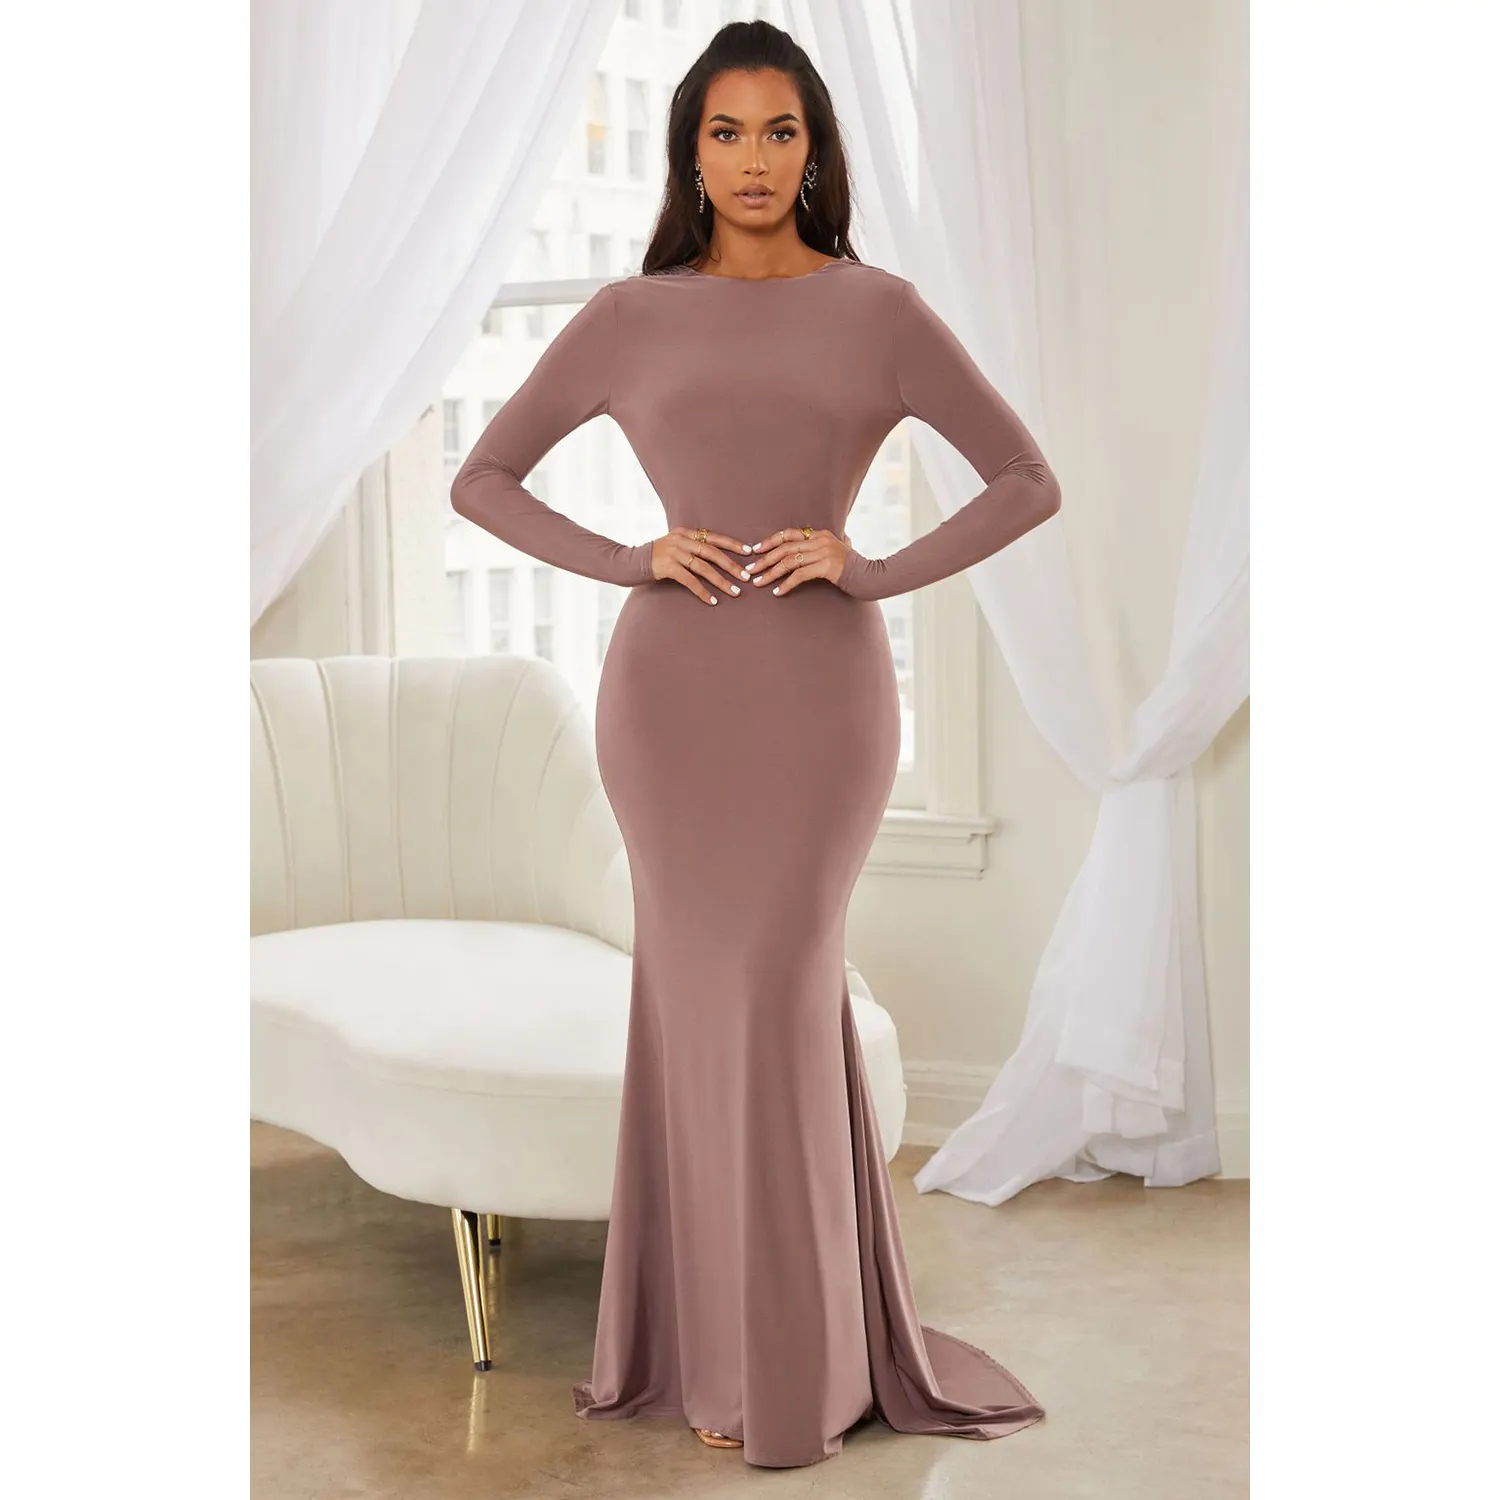 Arabic Muslim Girls Mocha Long Sleeve Fitted Backless Draped Maxi Dresses for Evening Party Full Jersey Natural ODM Adults Solid